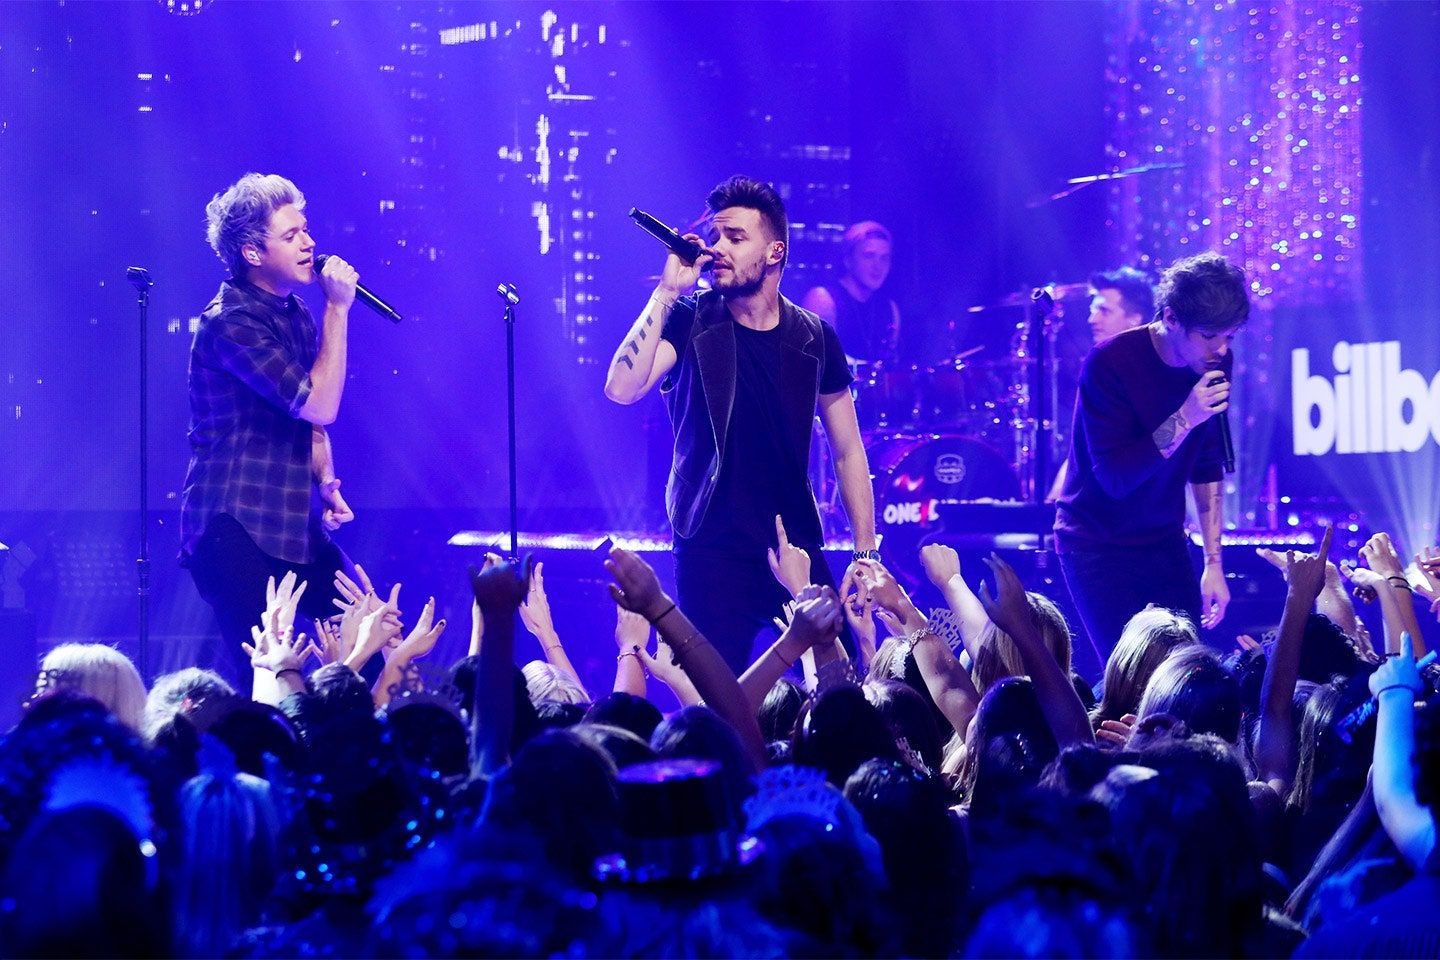 One direction performs at the billboard music awards - One Direction